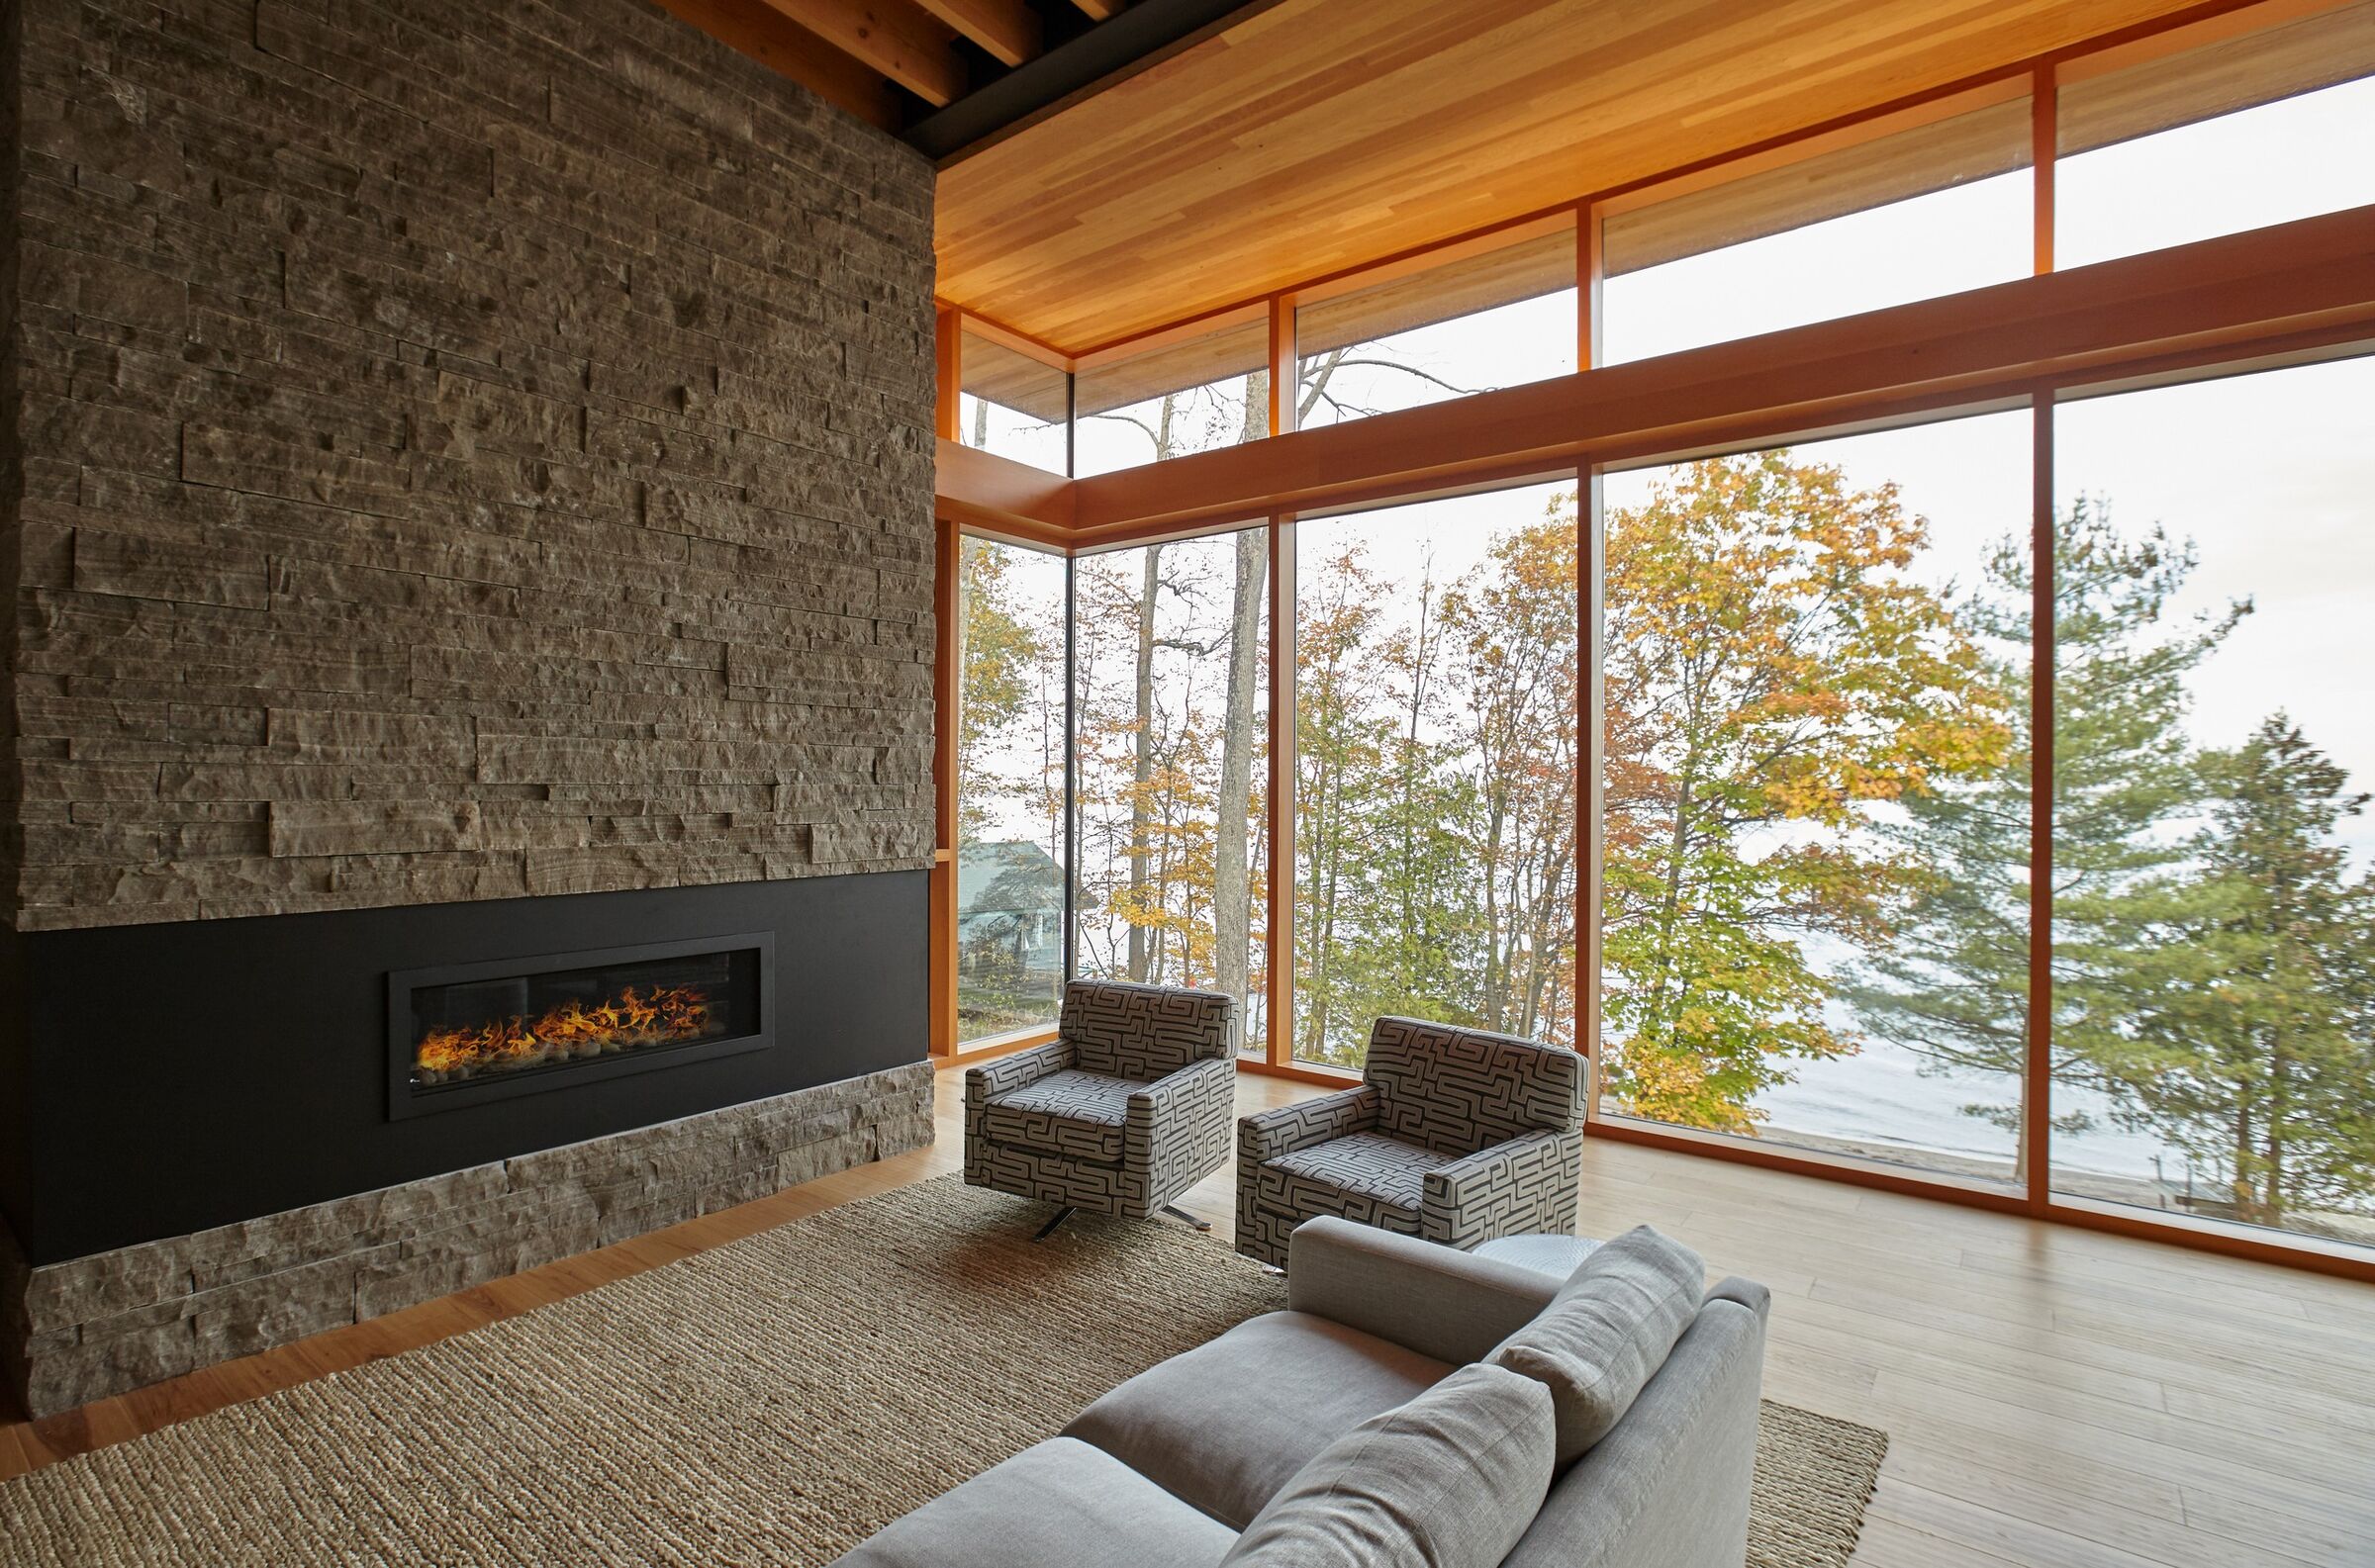 Living room with a lake view and marvelous fireplace